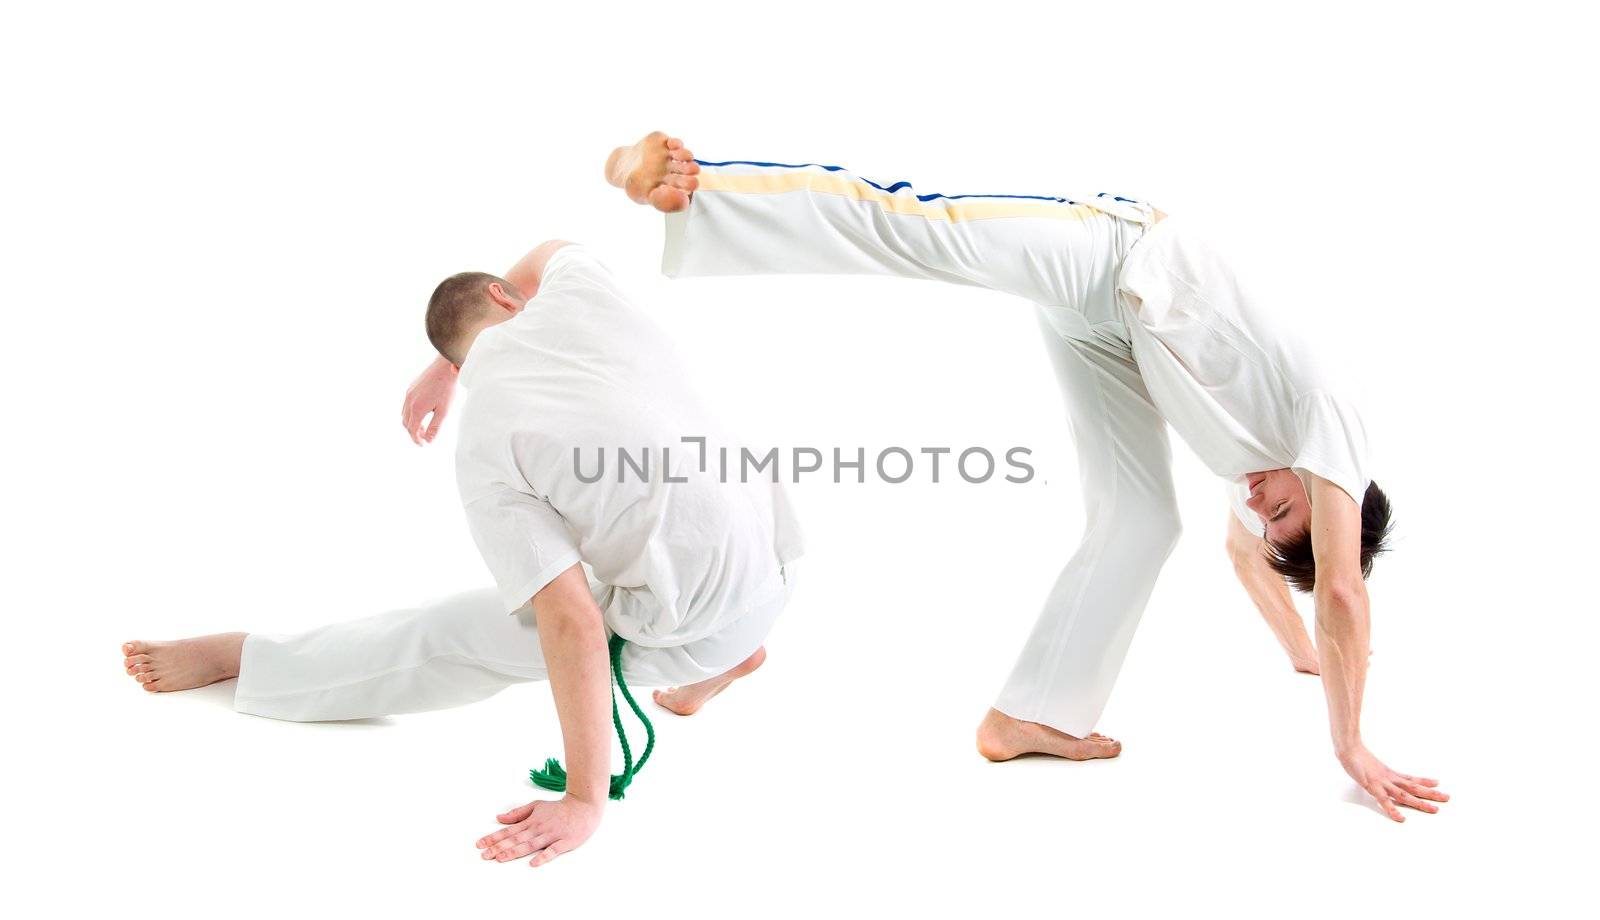 Contact Sport .Capoeira.over white background 